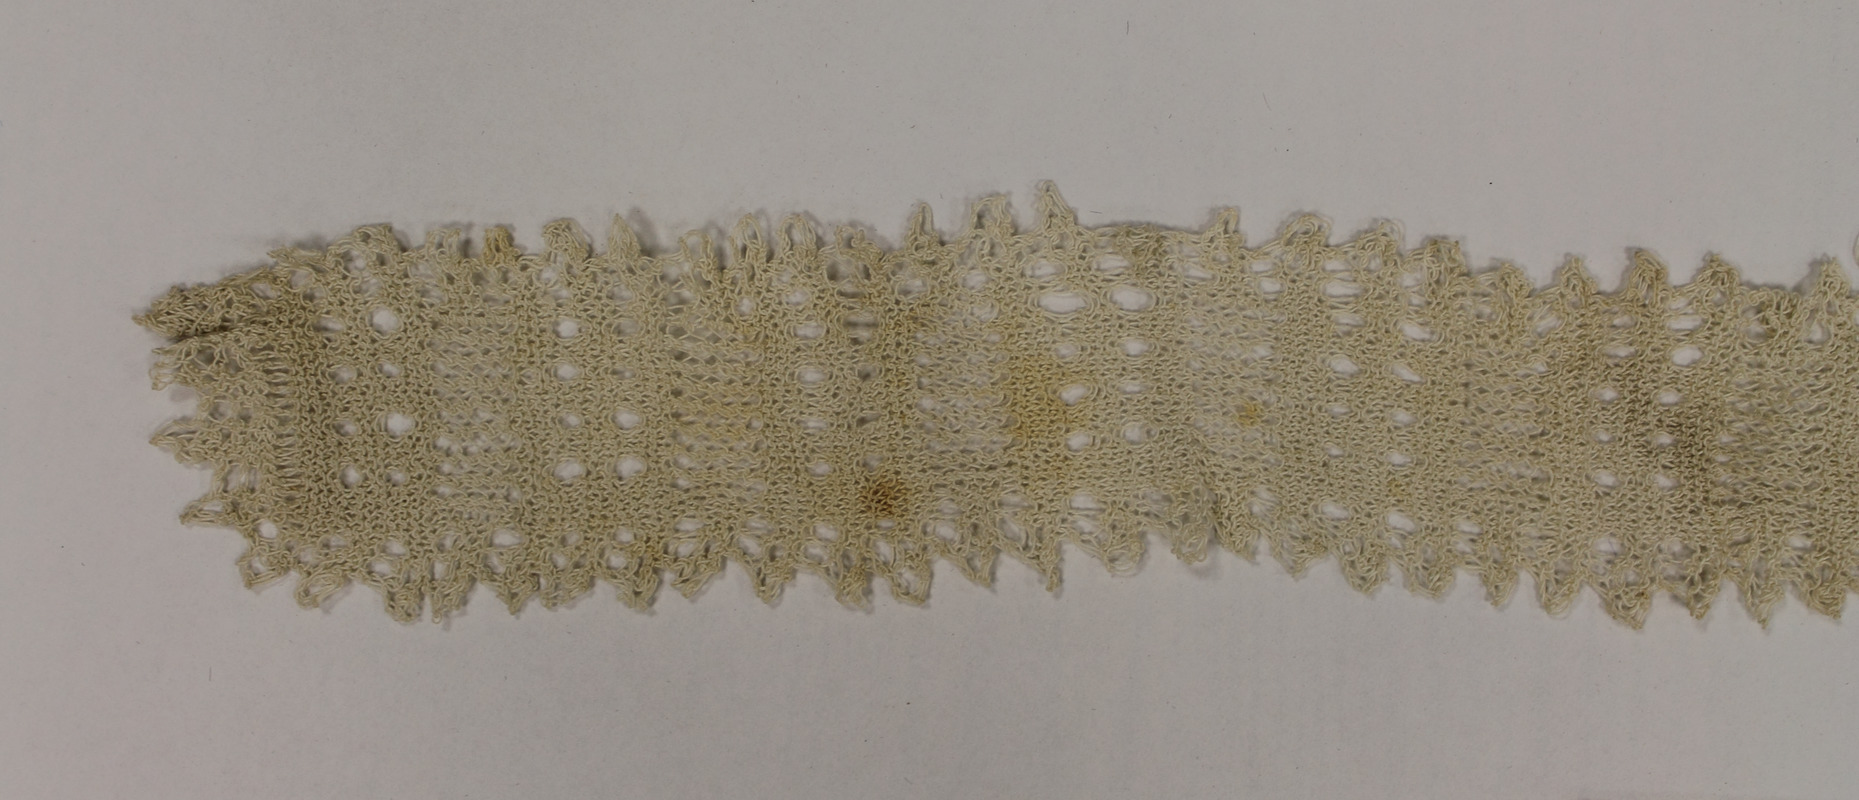 Lace made by Laura Bridgman (close-up)